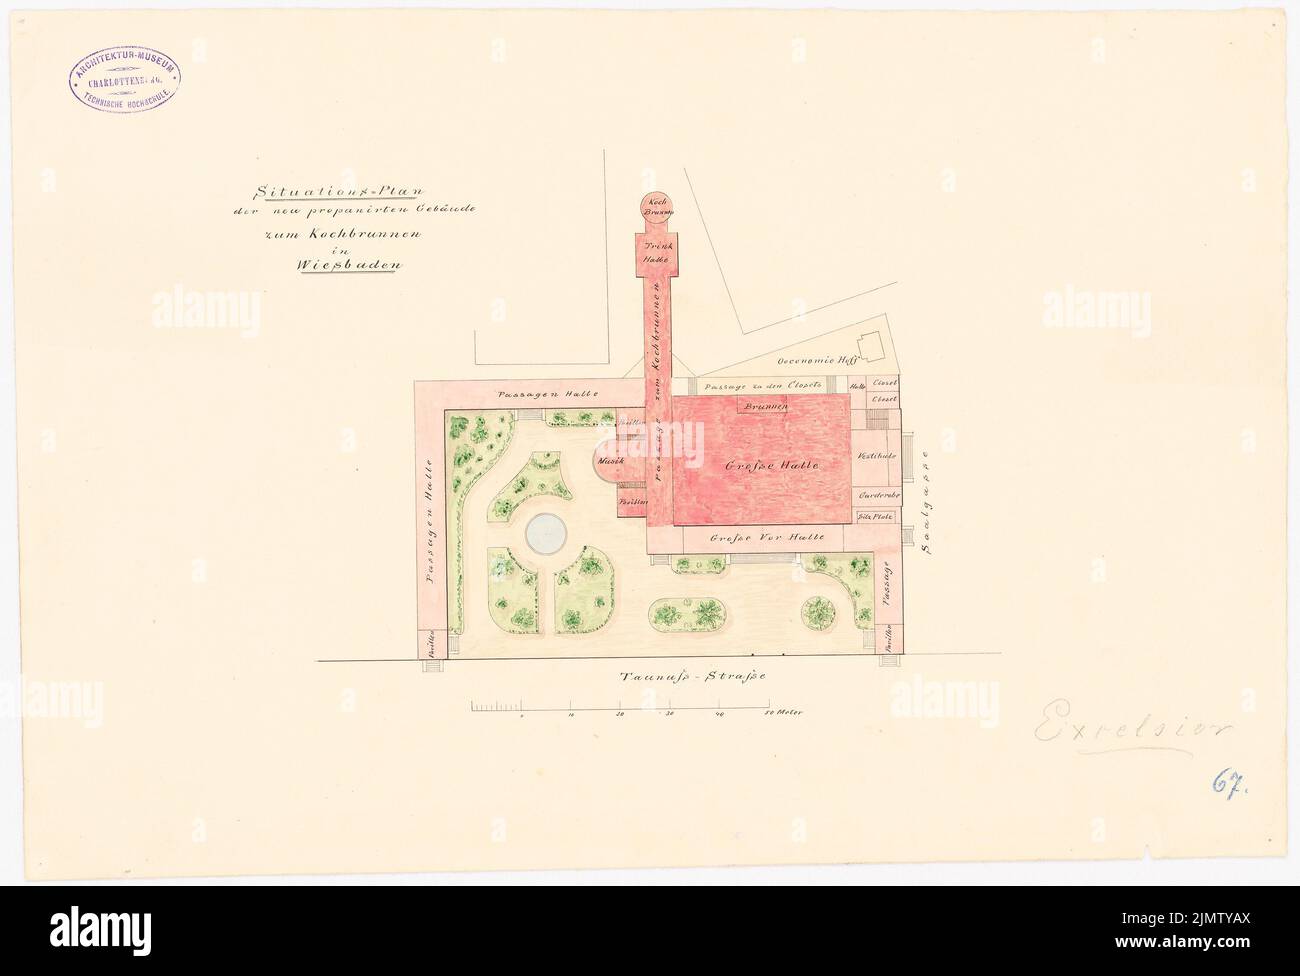 Wentzel Emil, drinking hall in Wiesbaden (1887): site plan. Tusche watercolor on the box, 35.5 x 52.1 cm (including scan edges) Wentzel Emil : Trinkhalle, Wiesbaden Stock Photo